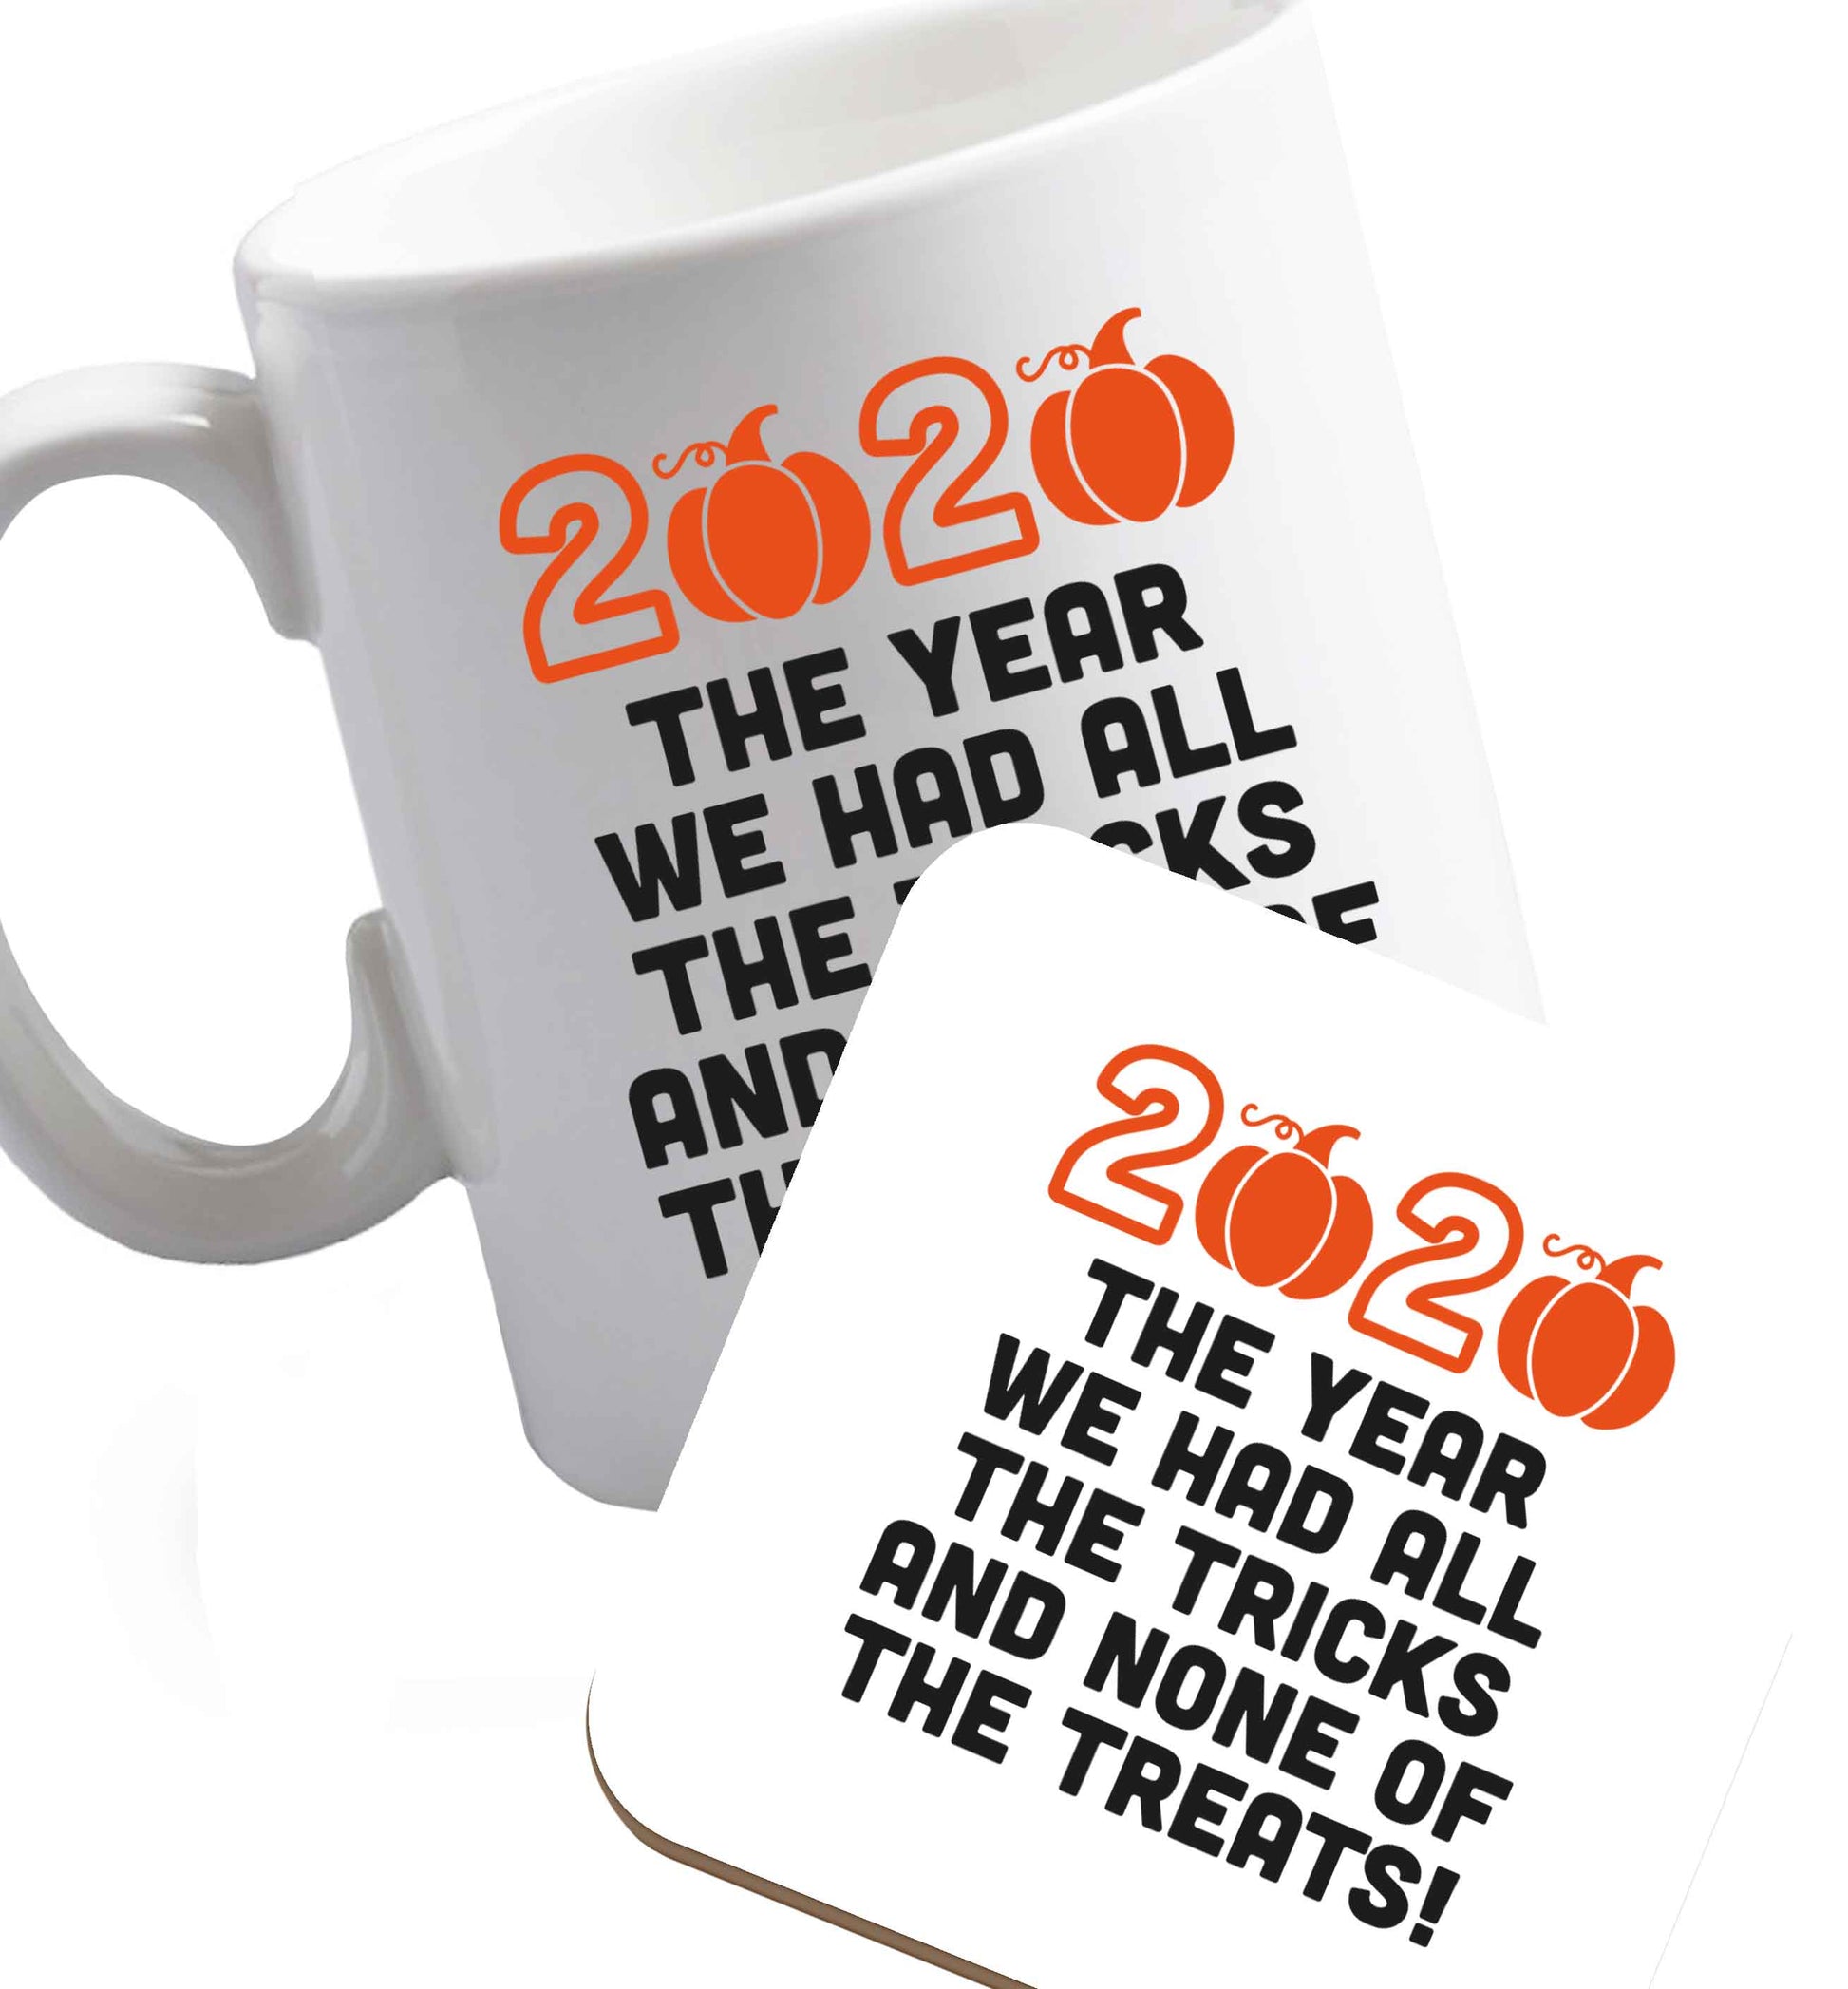 10 oz 2020 The year we had all of the tricks and none of the treats ceramic mug and coaster set right handed